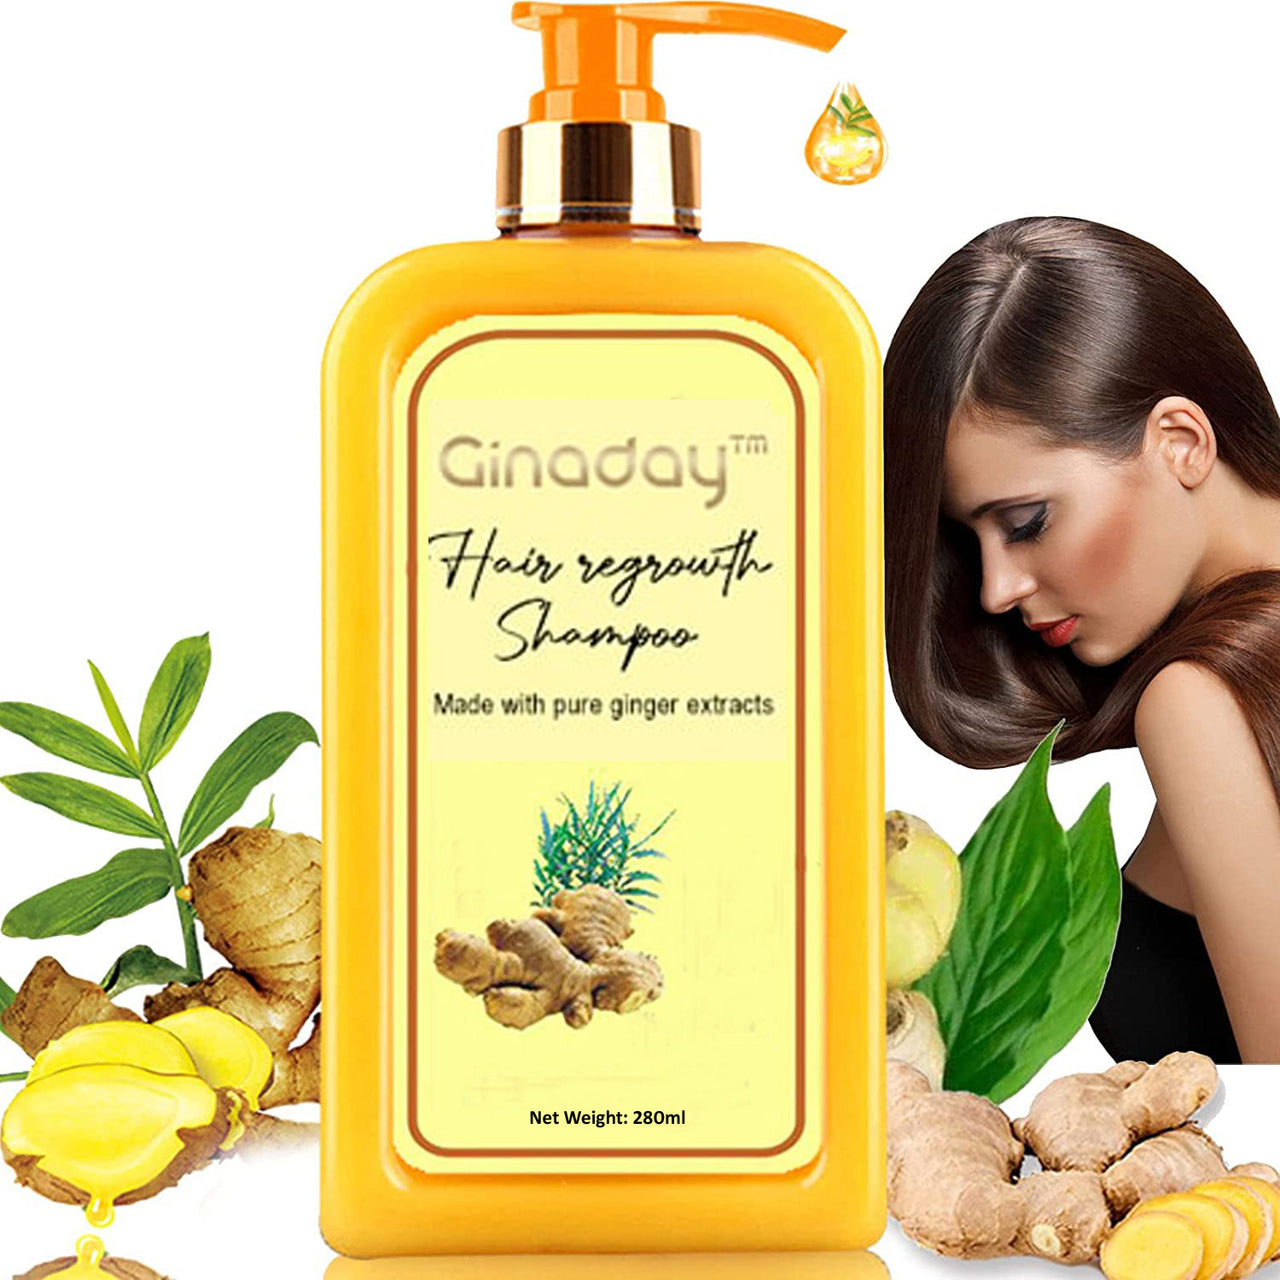 Ginaday™ Instant Ginger Hair Regrowth Shampoo - thedealzninja